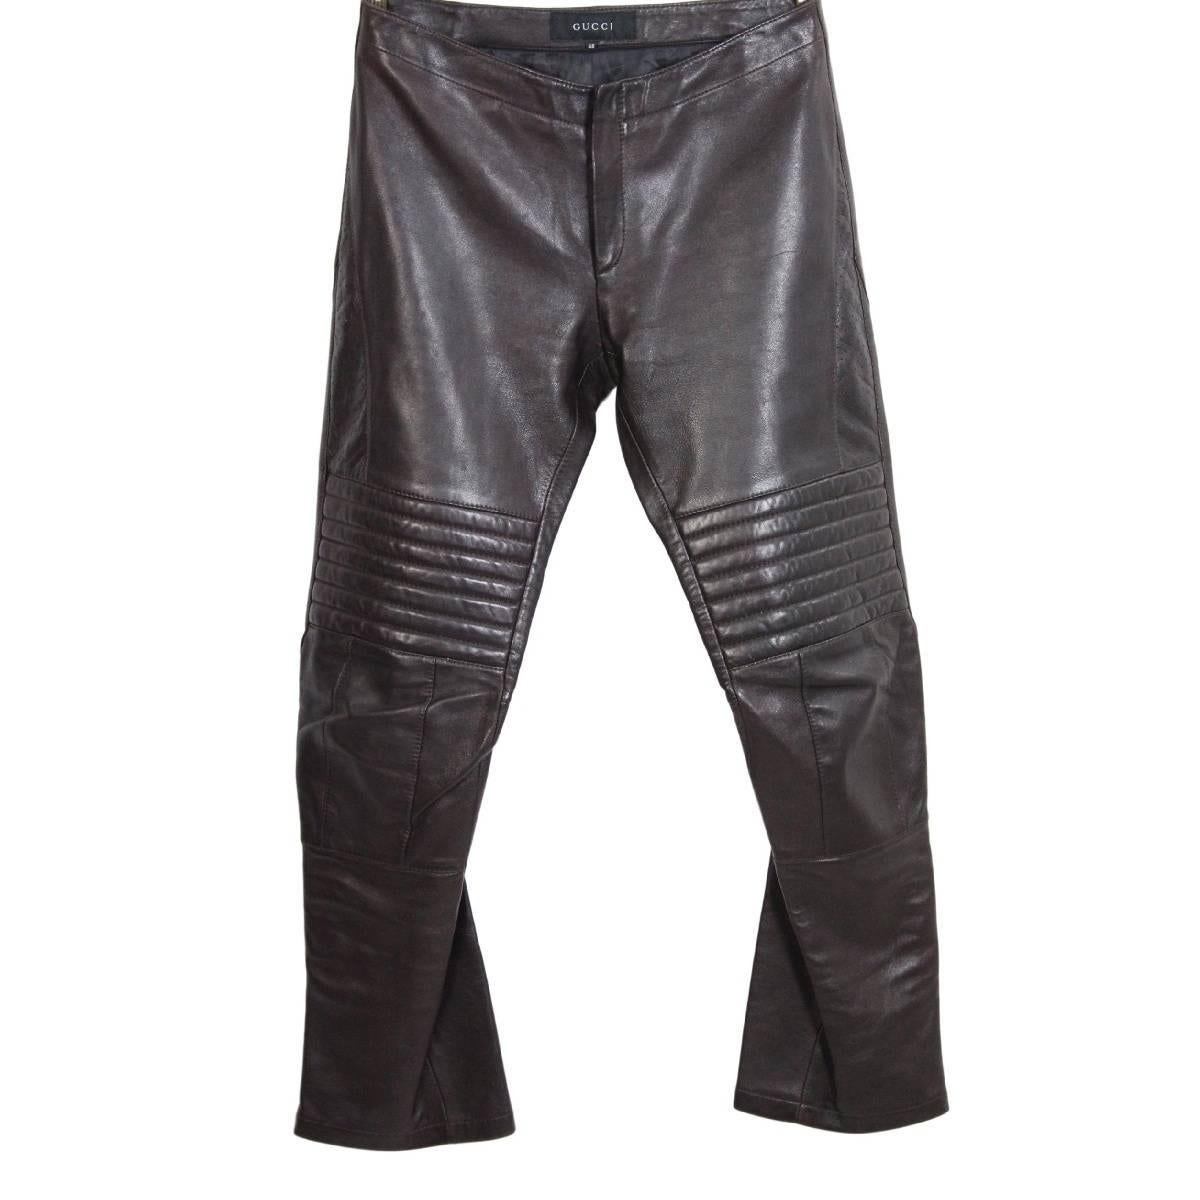 Tom Ford For Gucci Biker Brown Leather Italian Trousers, 2000s